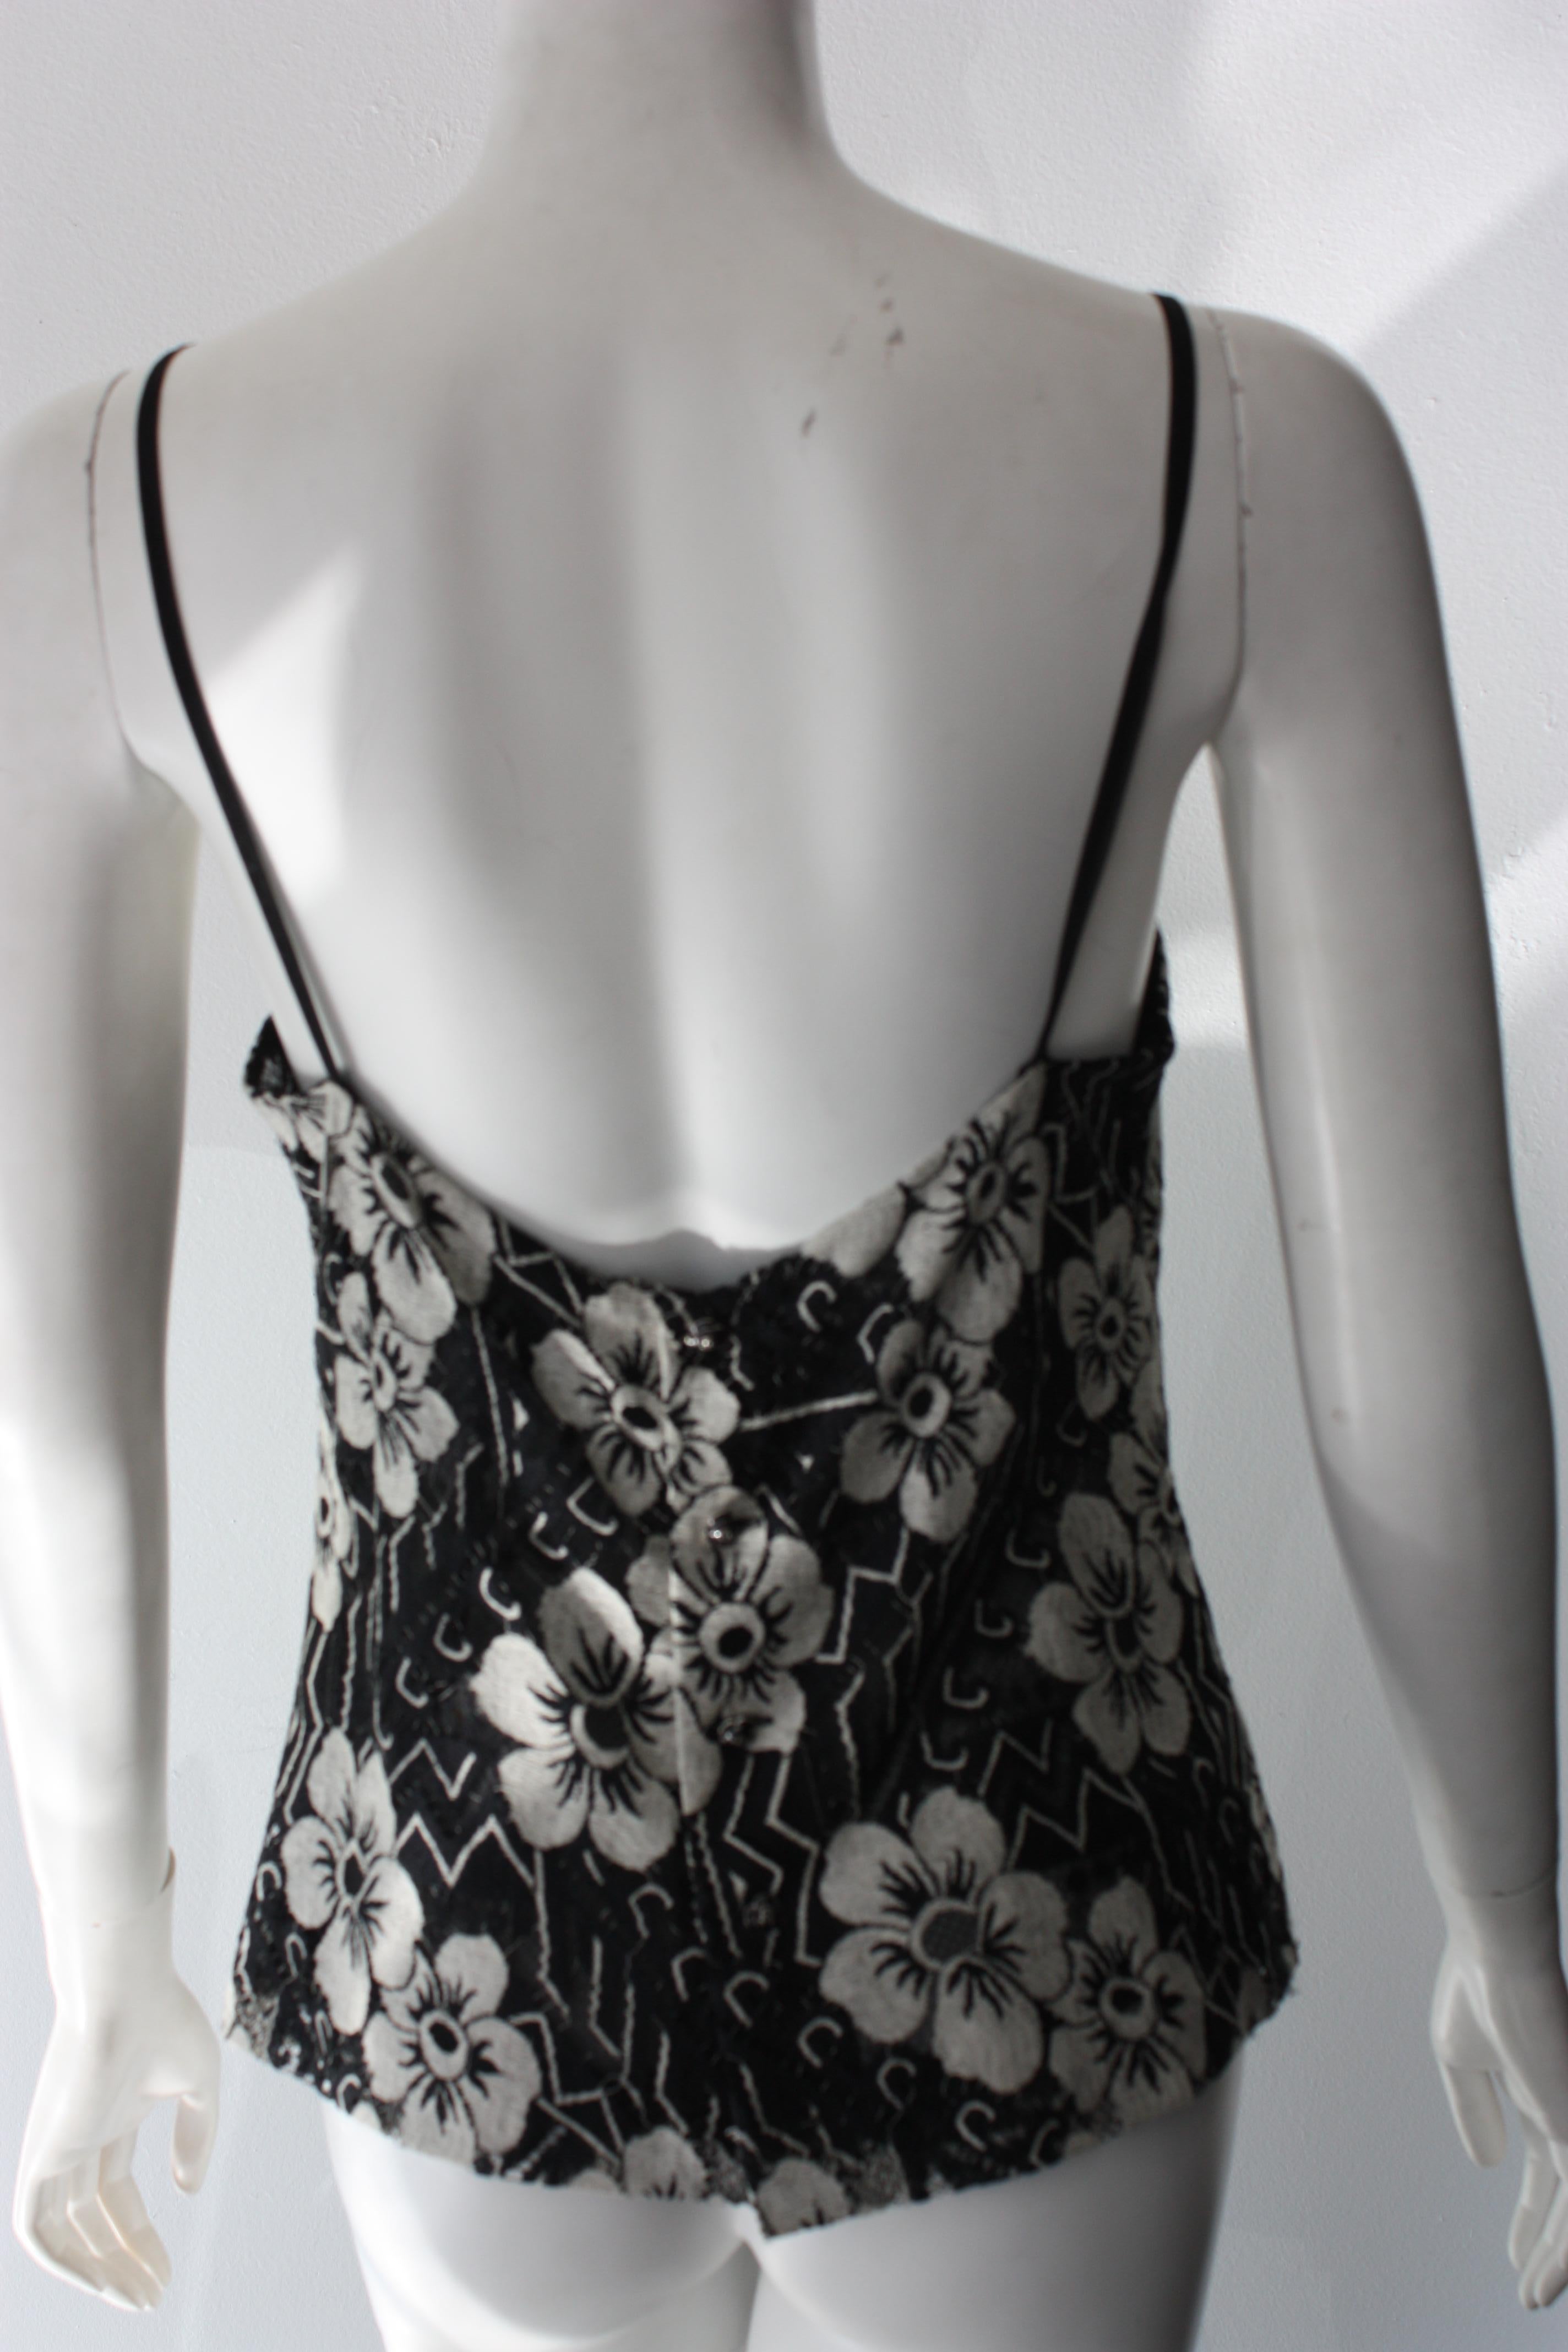 Chanel Black and White Floral Lace Top Size 40 *fits small 3